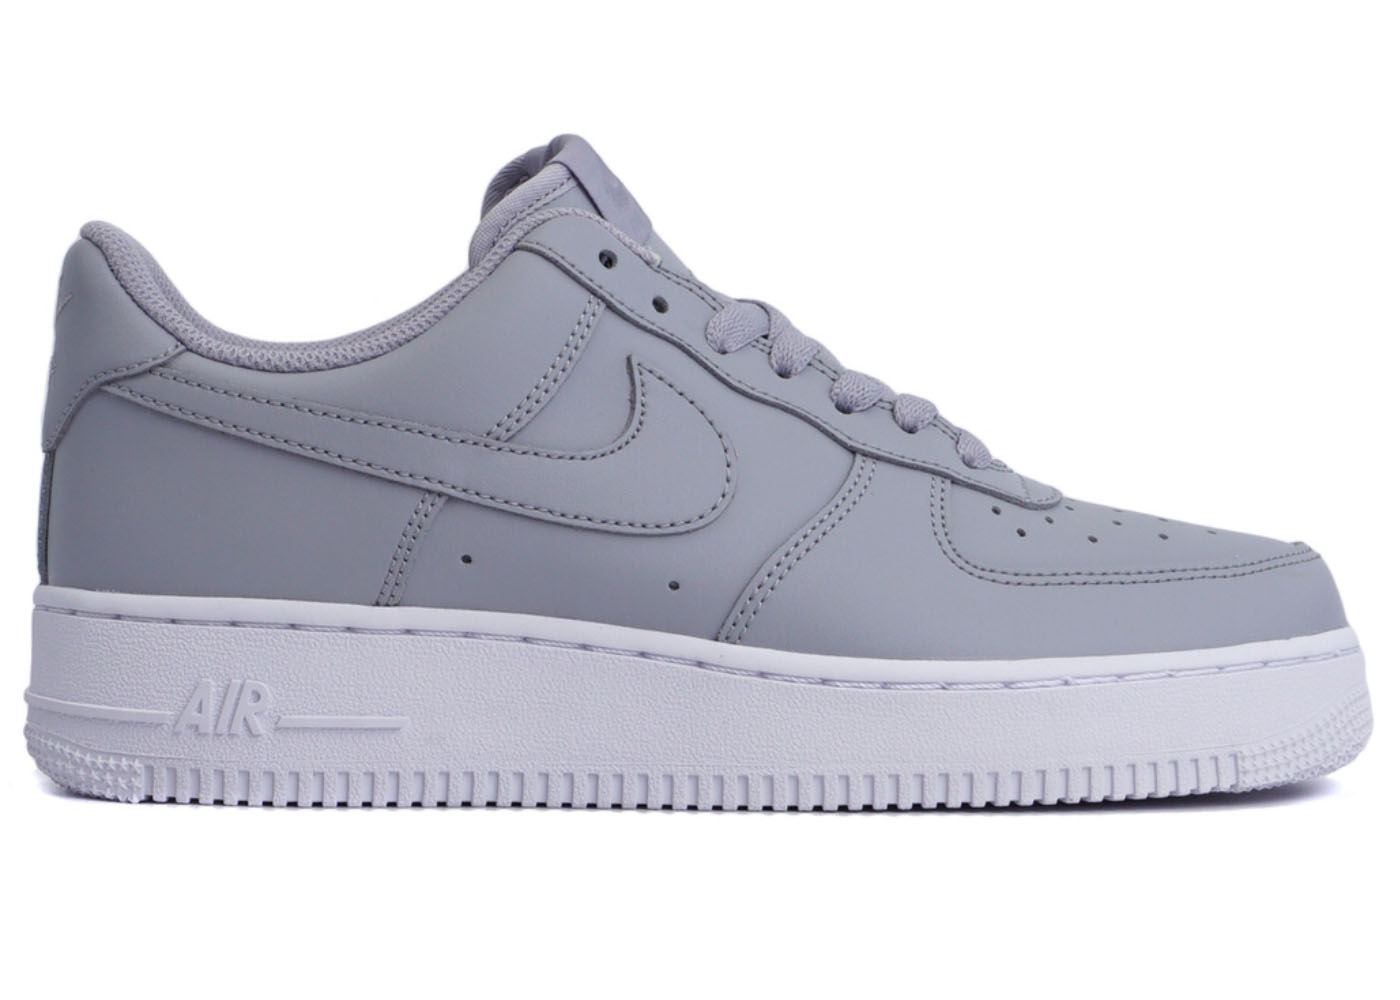 wolf grey white air force 1